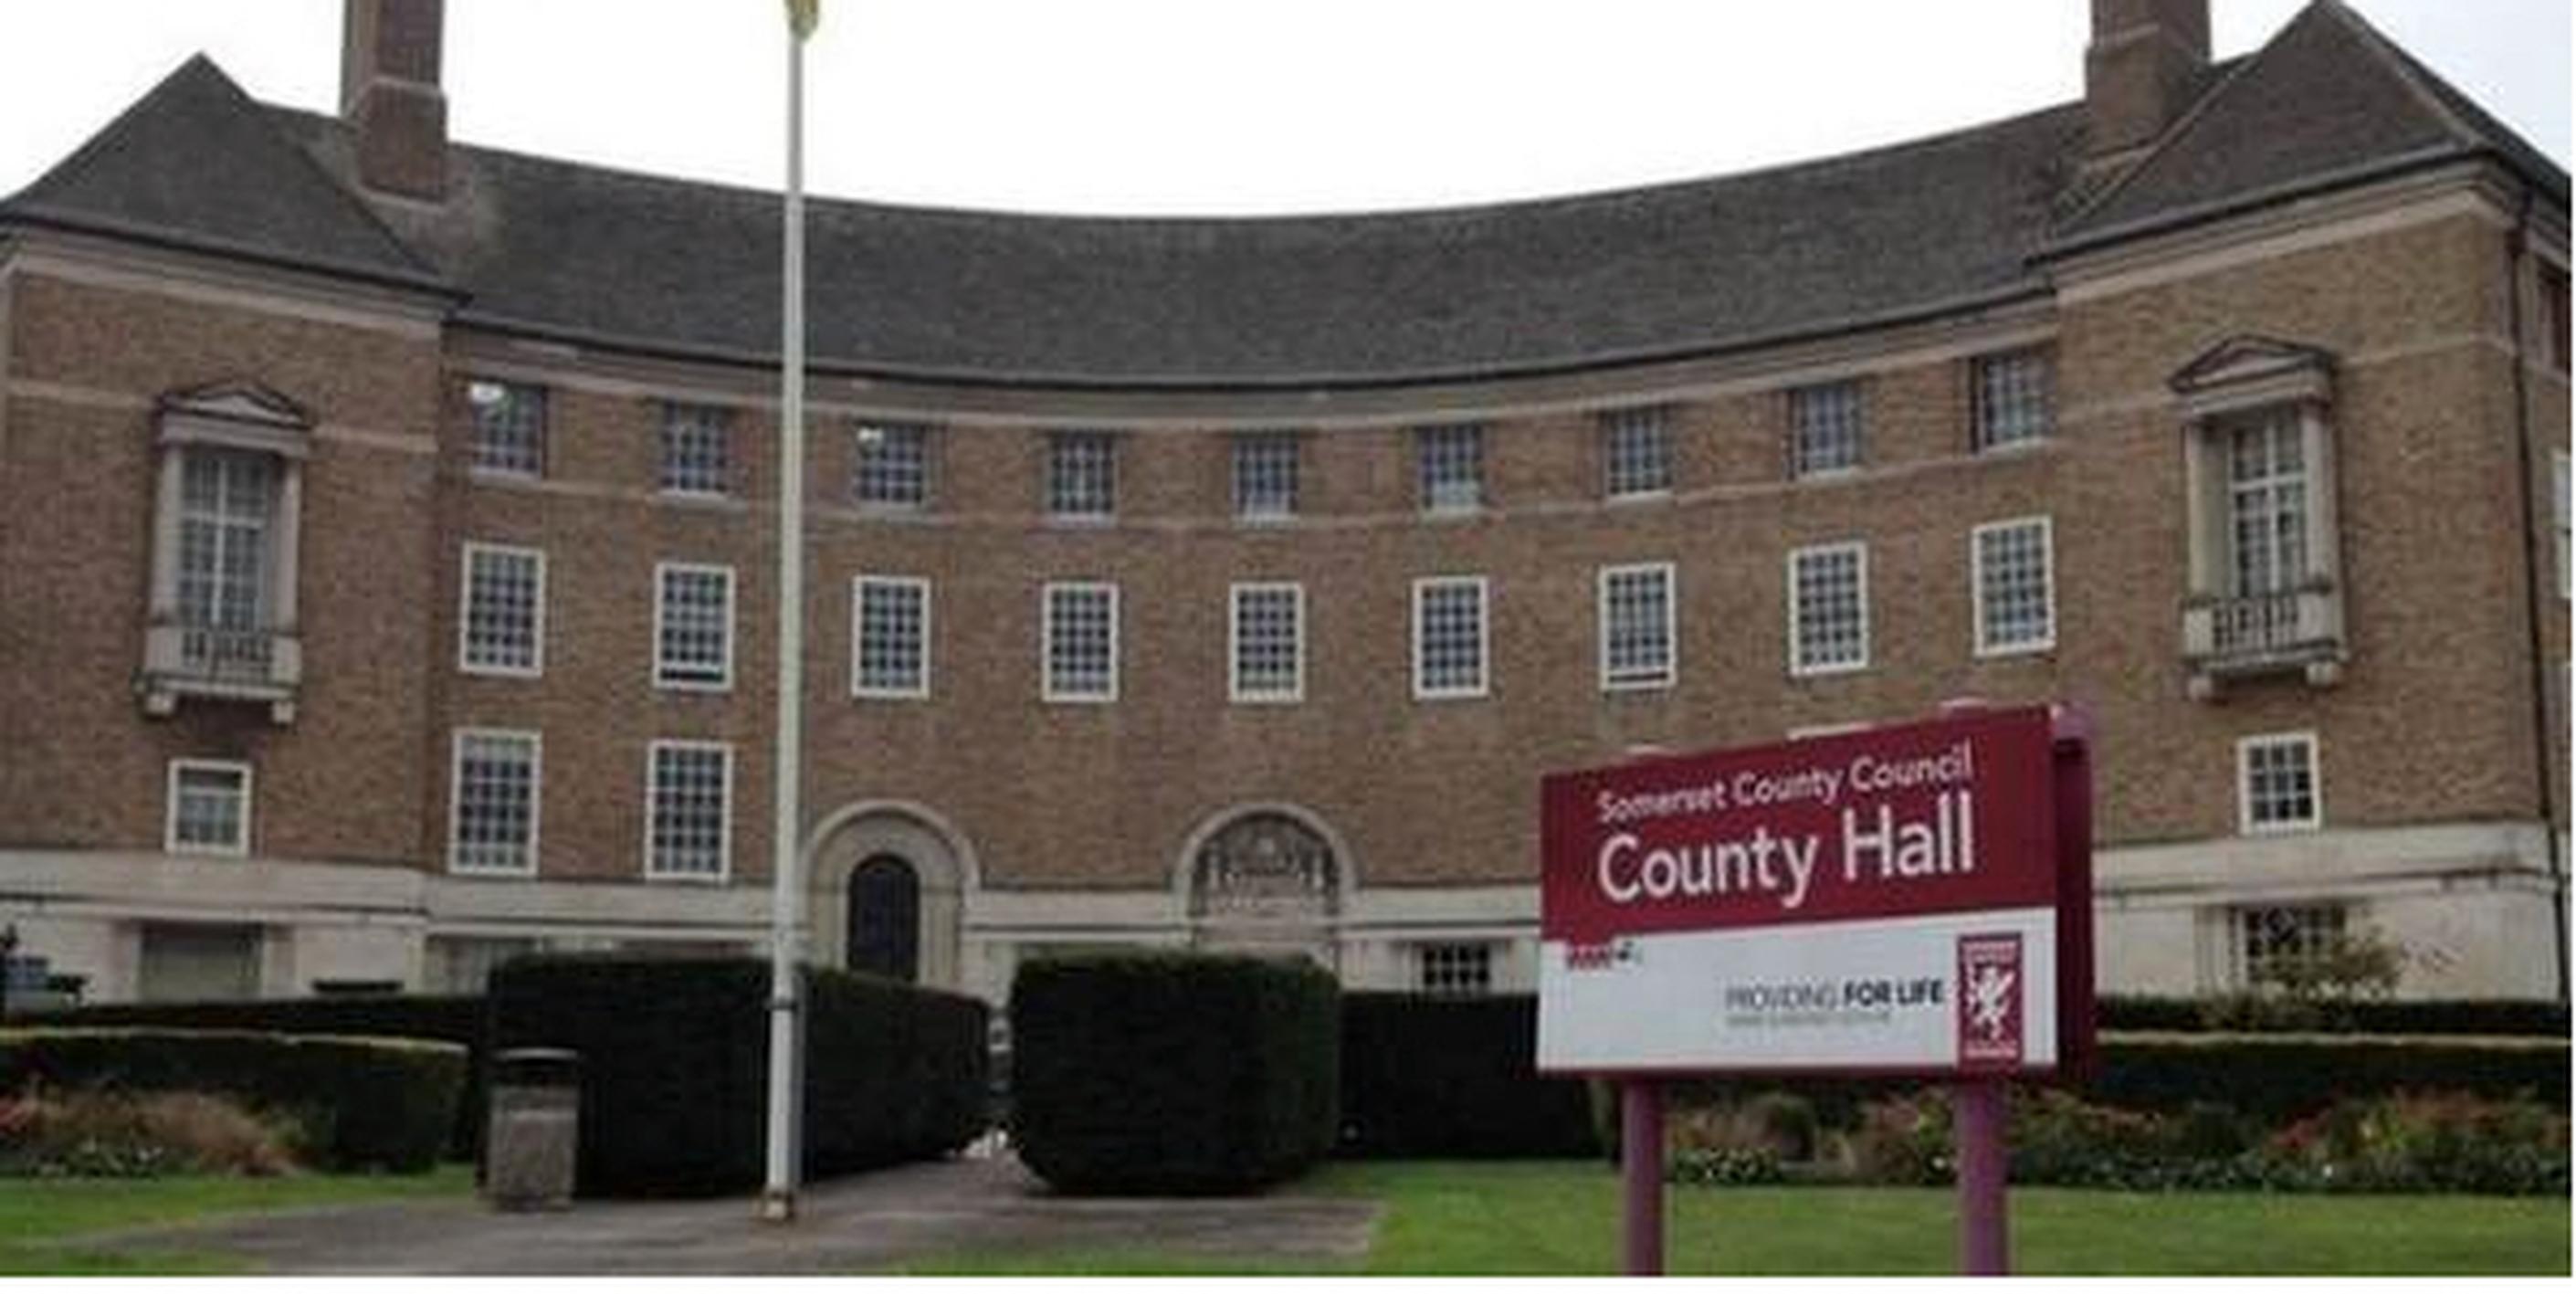 The new parking permit is designed to manage demand for workplace parking at County Hall in Taunton and encourage travel by other modes, says Somerset County Council